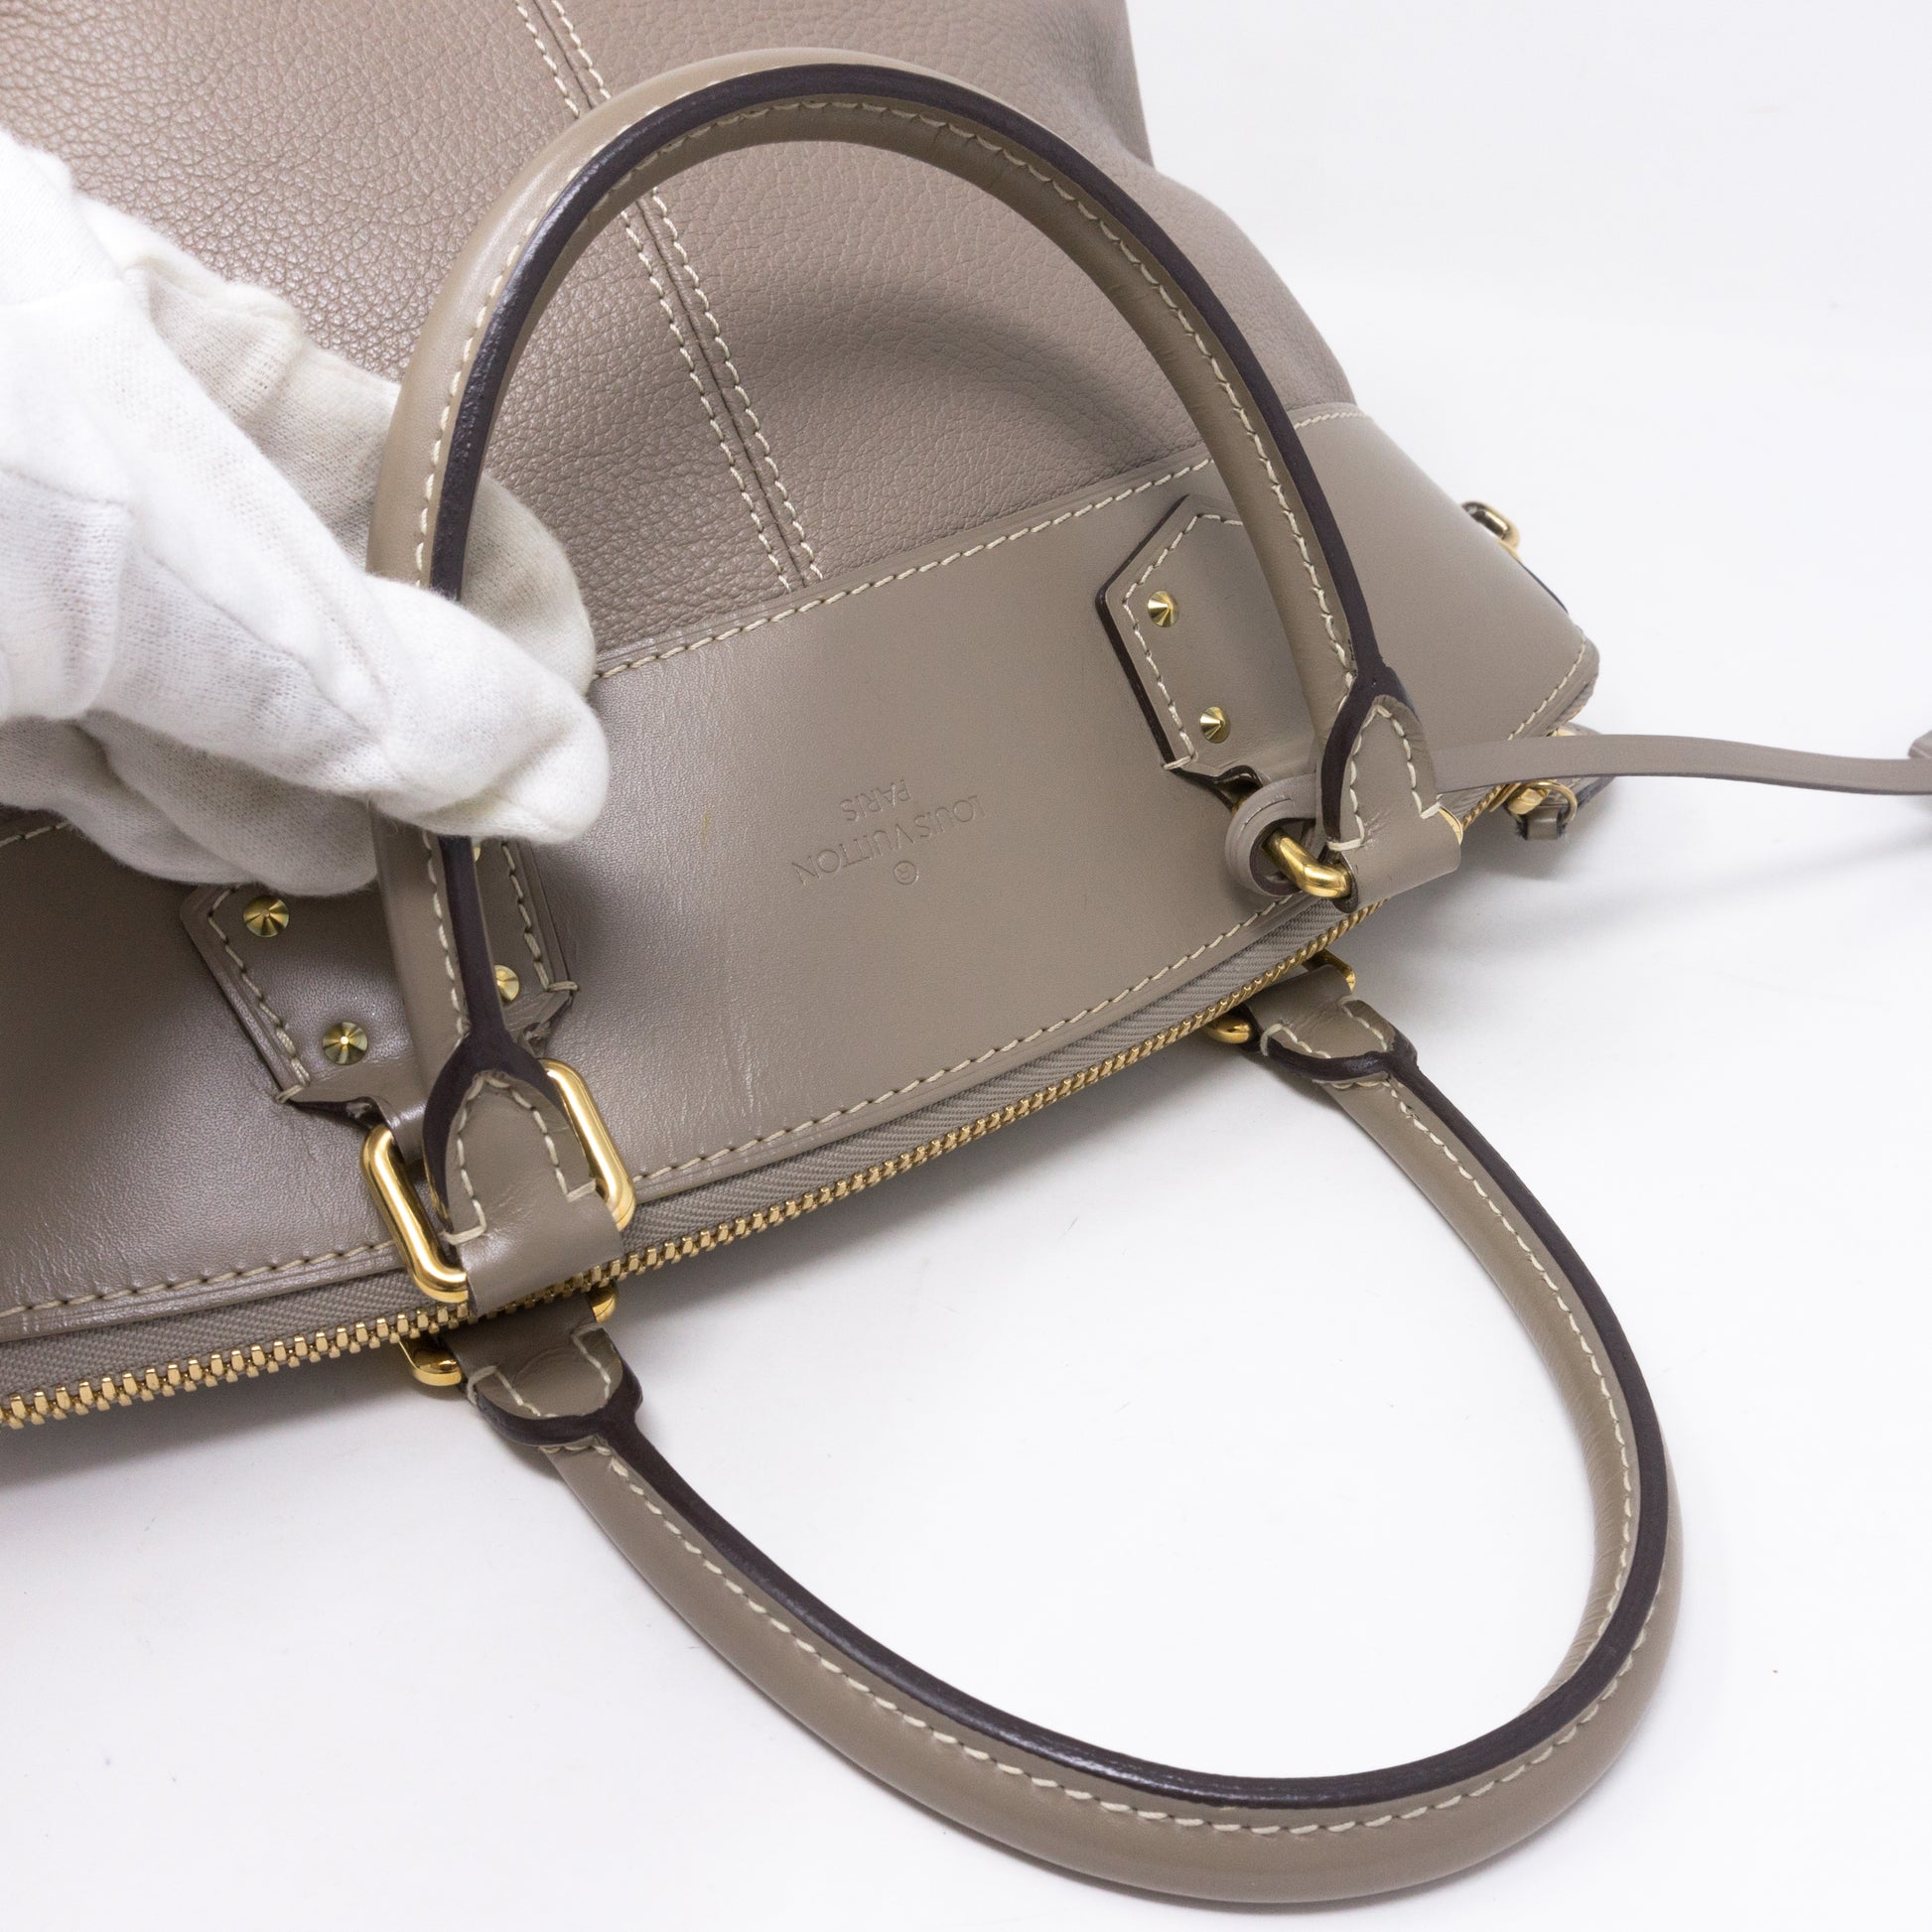 LOUIS VUITTON Suhali Lockit PM Bag – Collections Couture